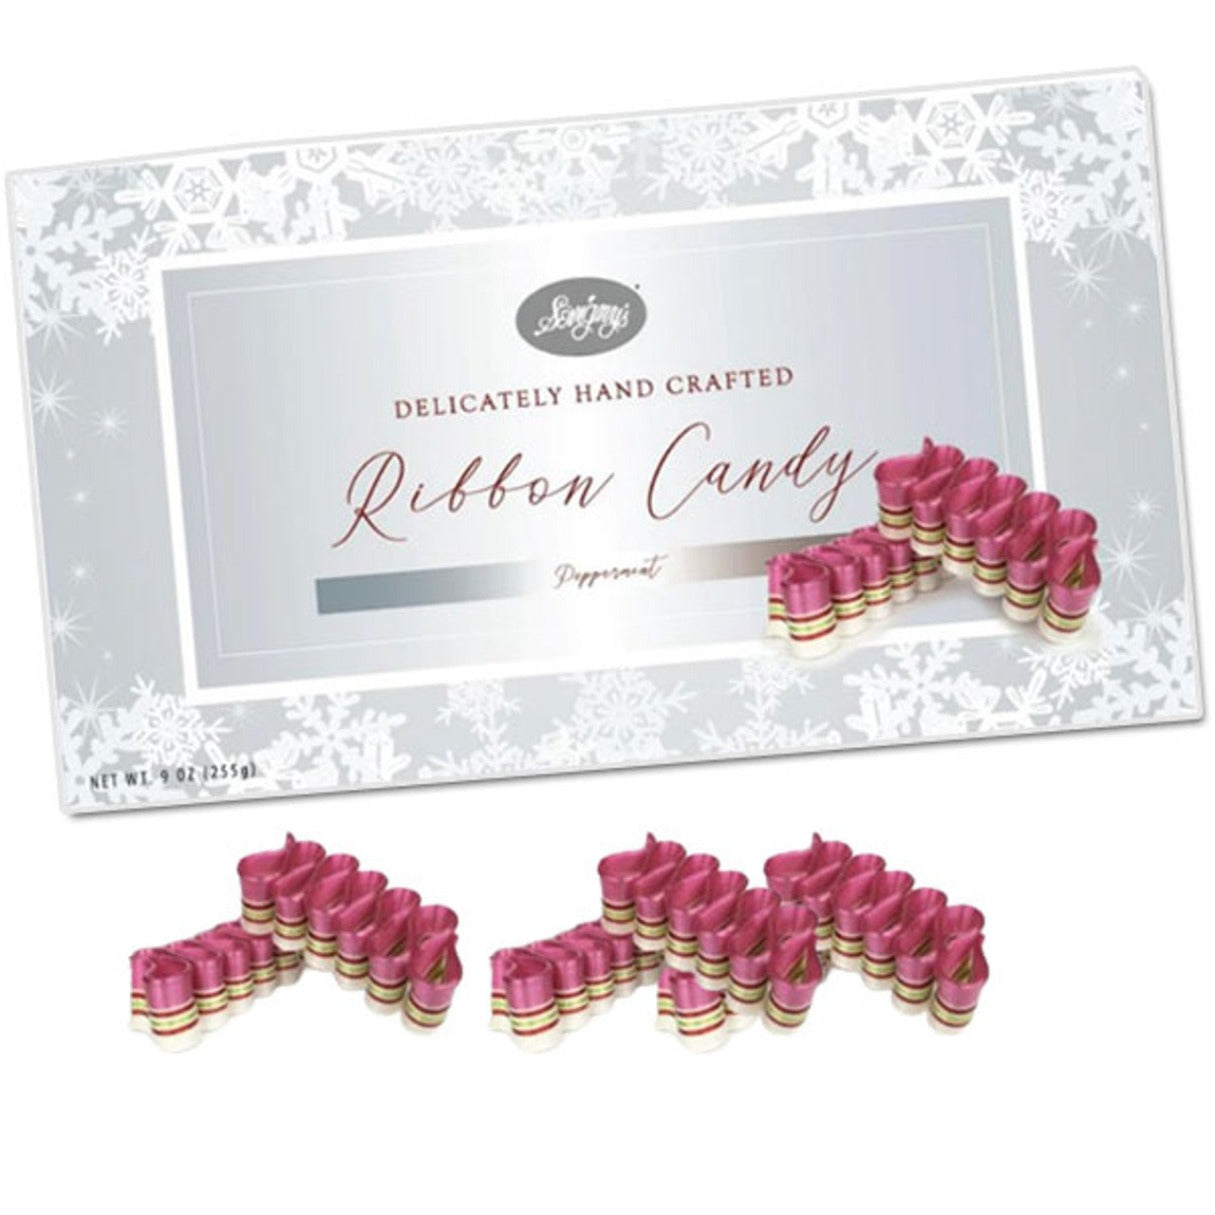 All Peppermint Thin Ribbon Candy 9oz (Silver Box) - 12ct